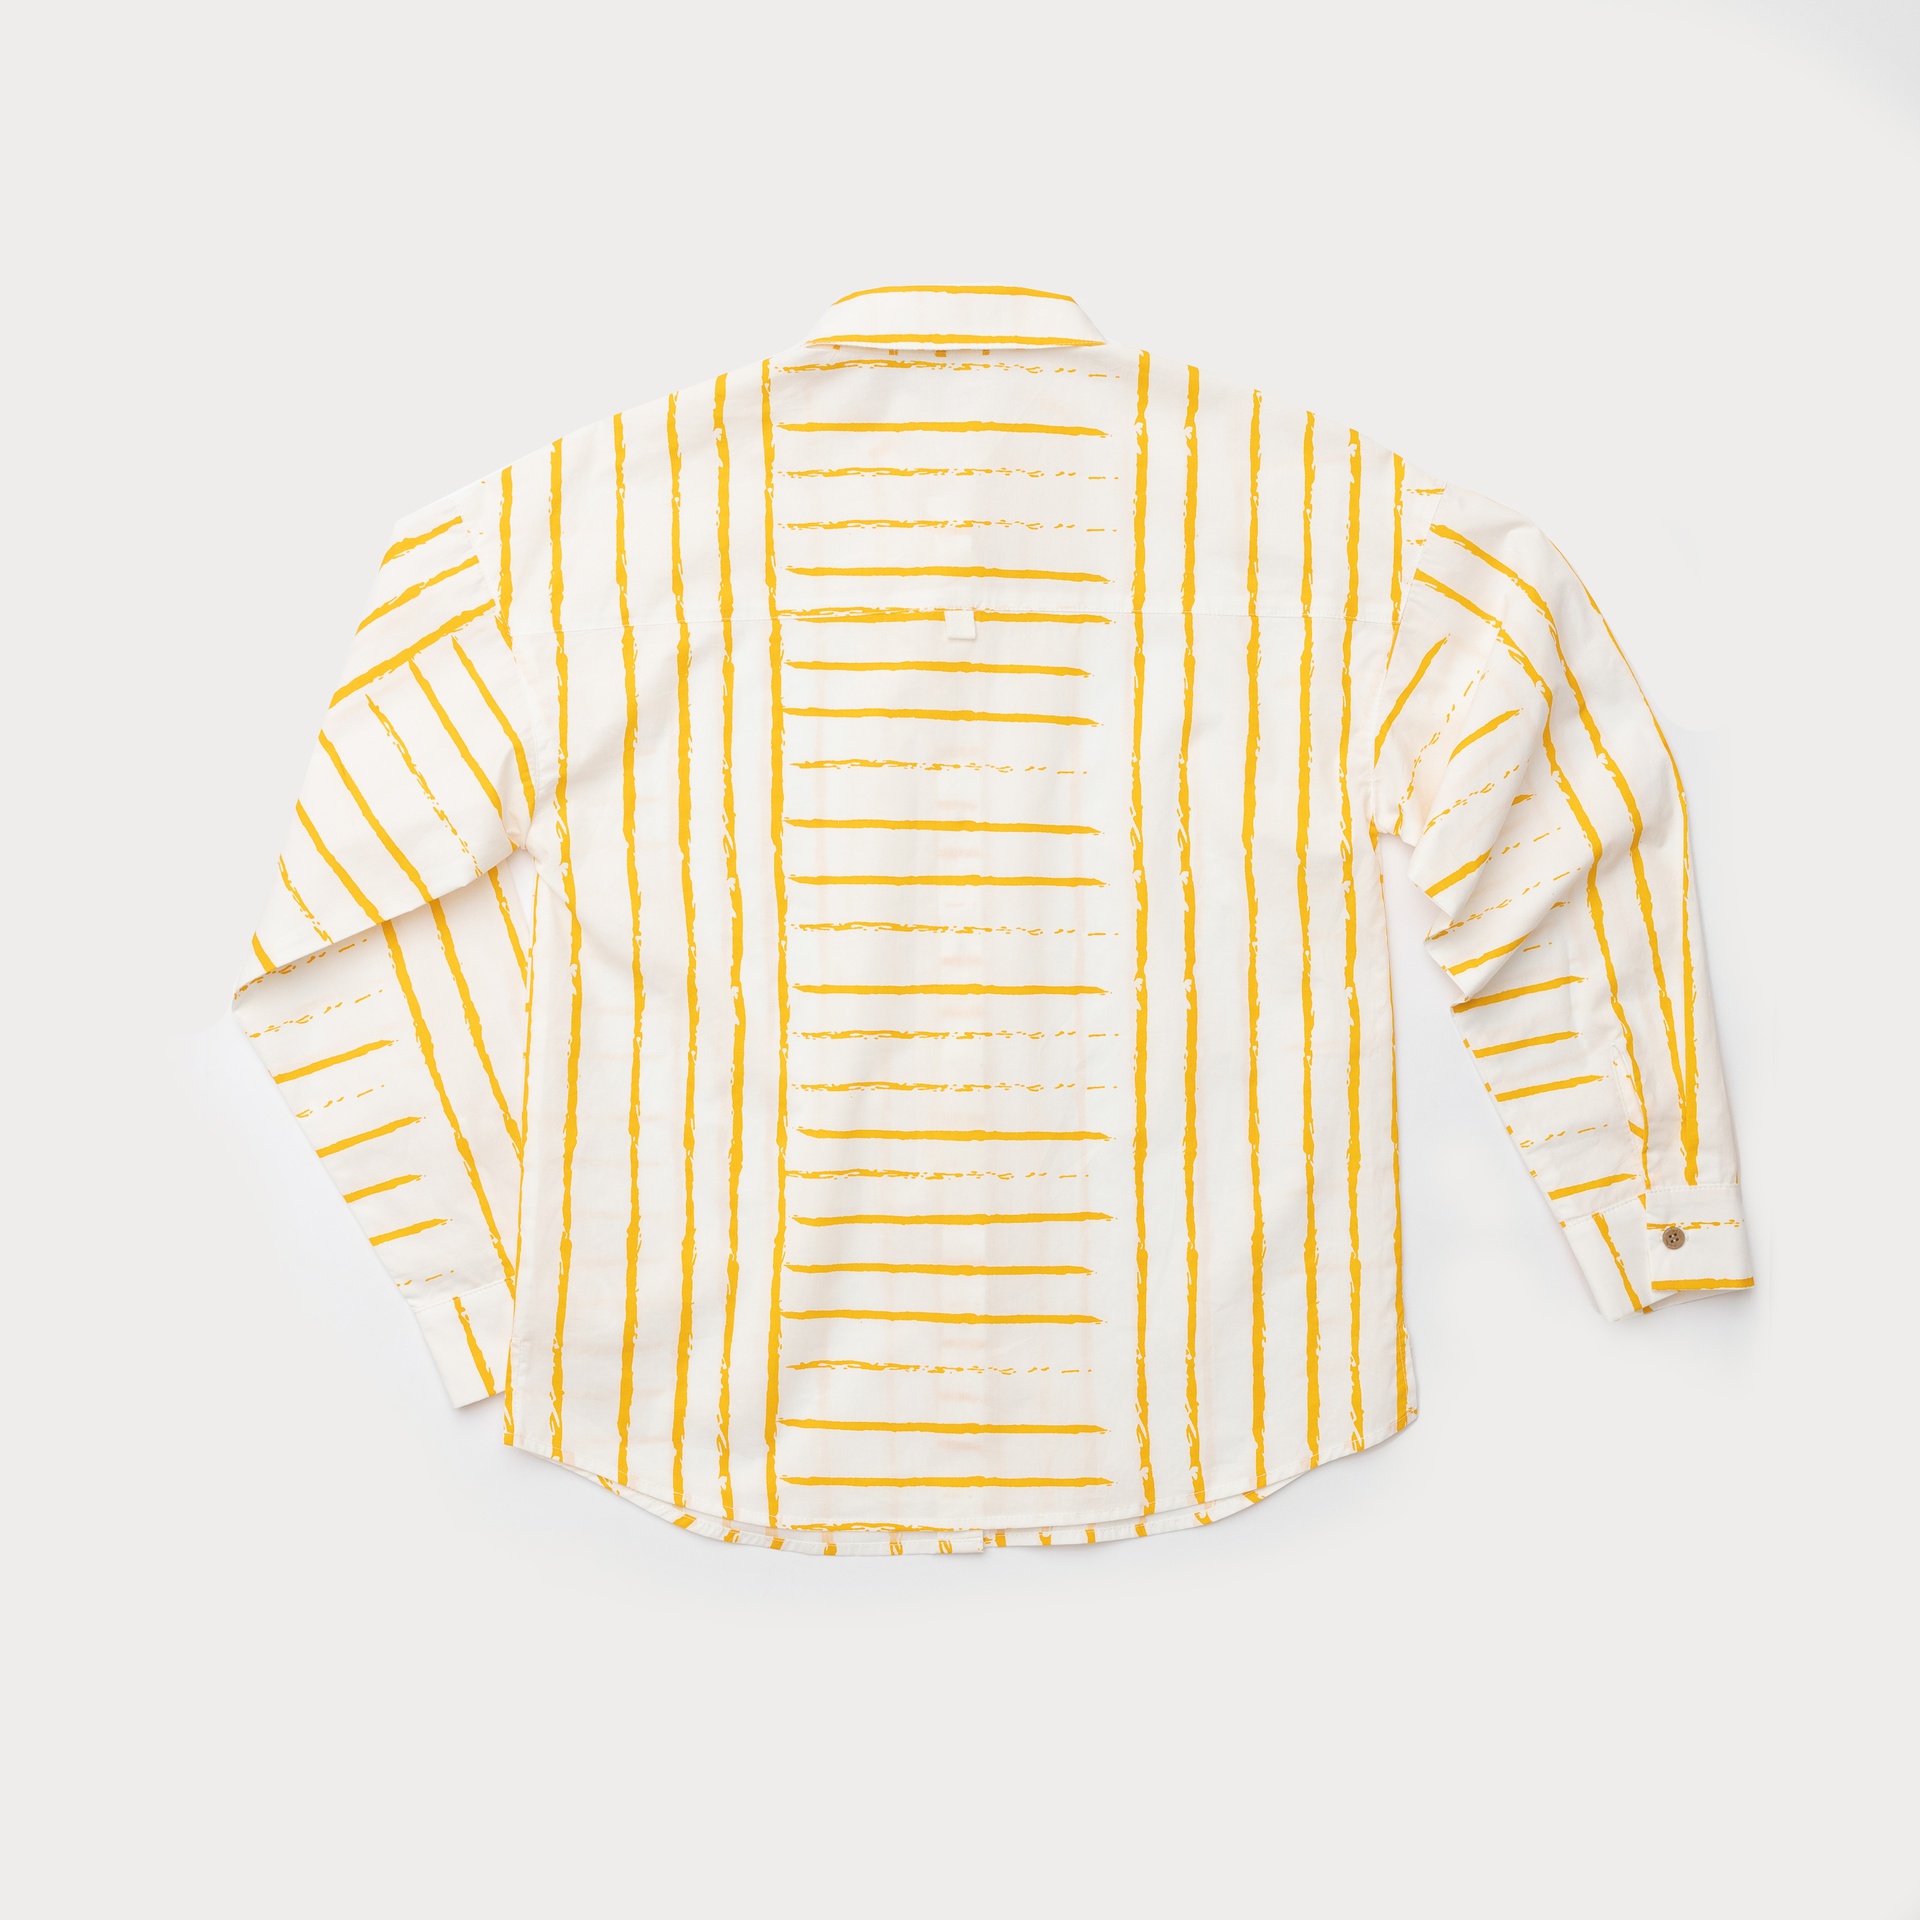 Painted Stripe Blouse